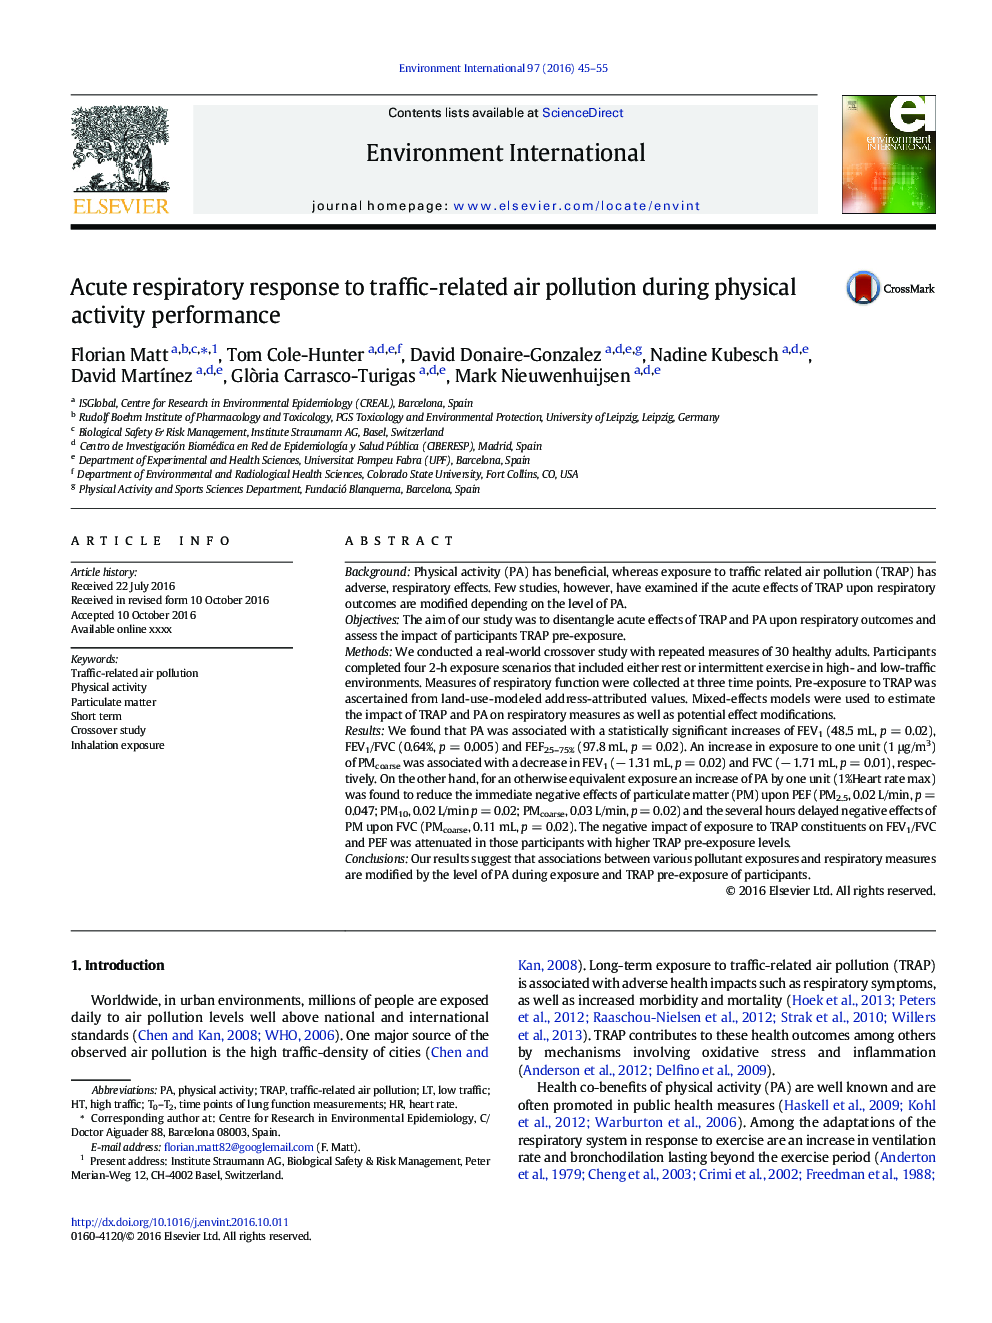 Acute respiratory response to traffic-related air pollution during physical activity performance